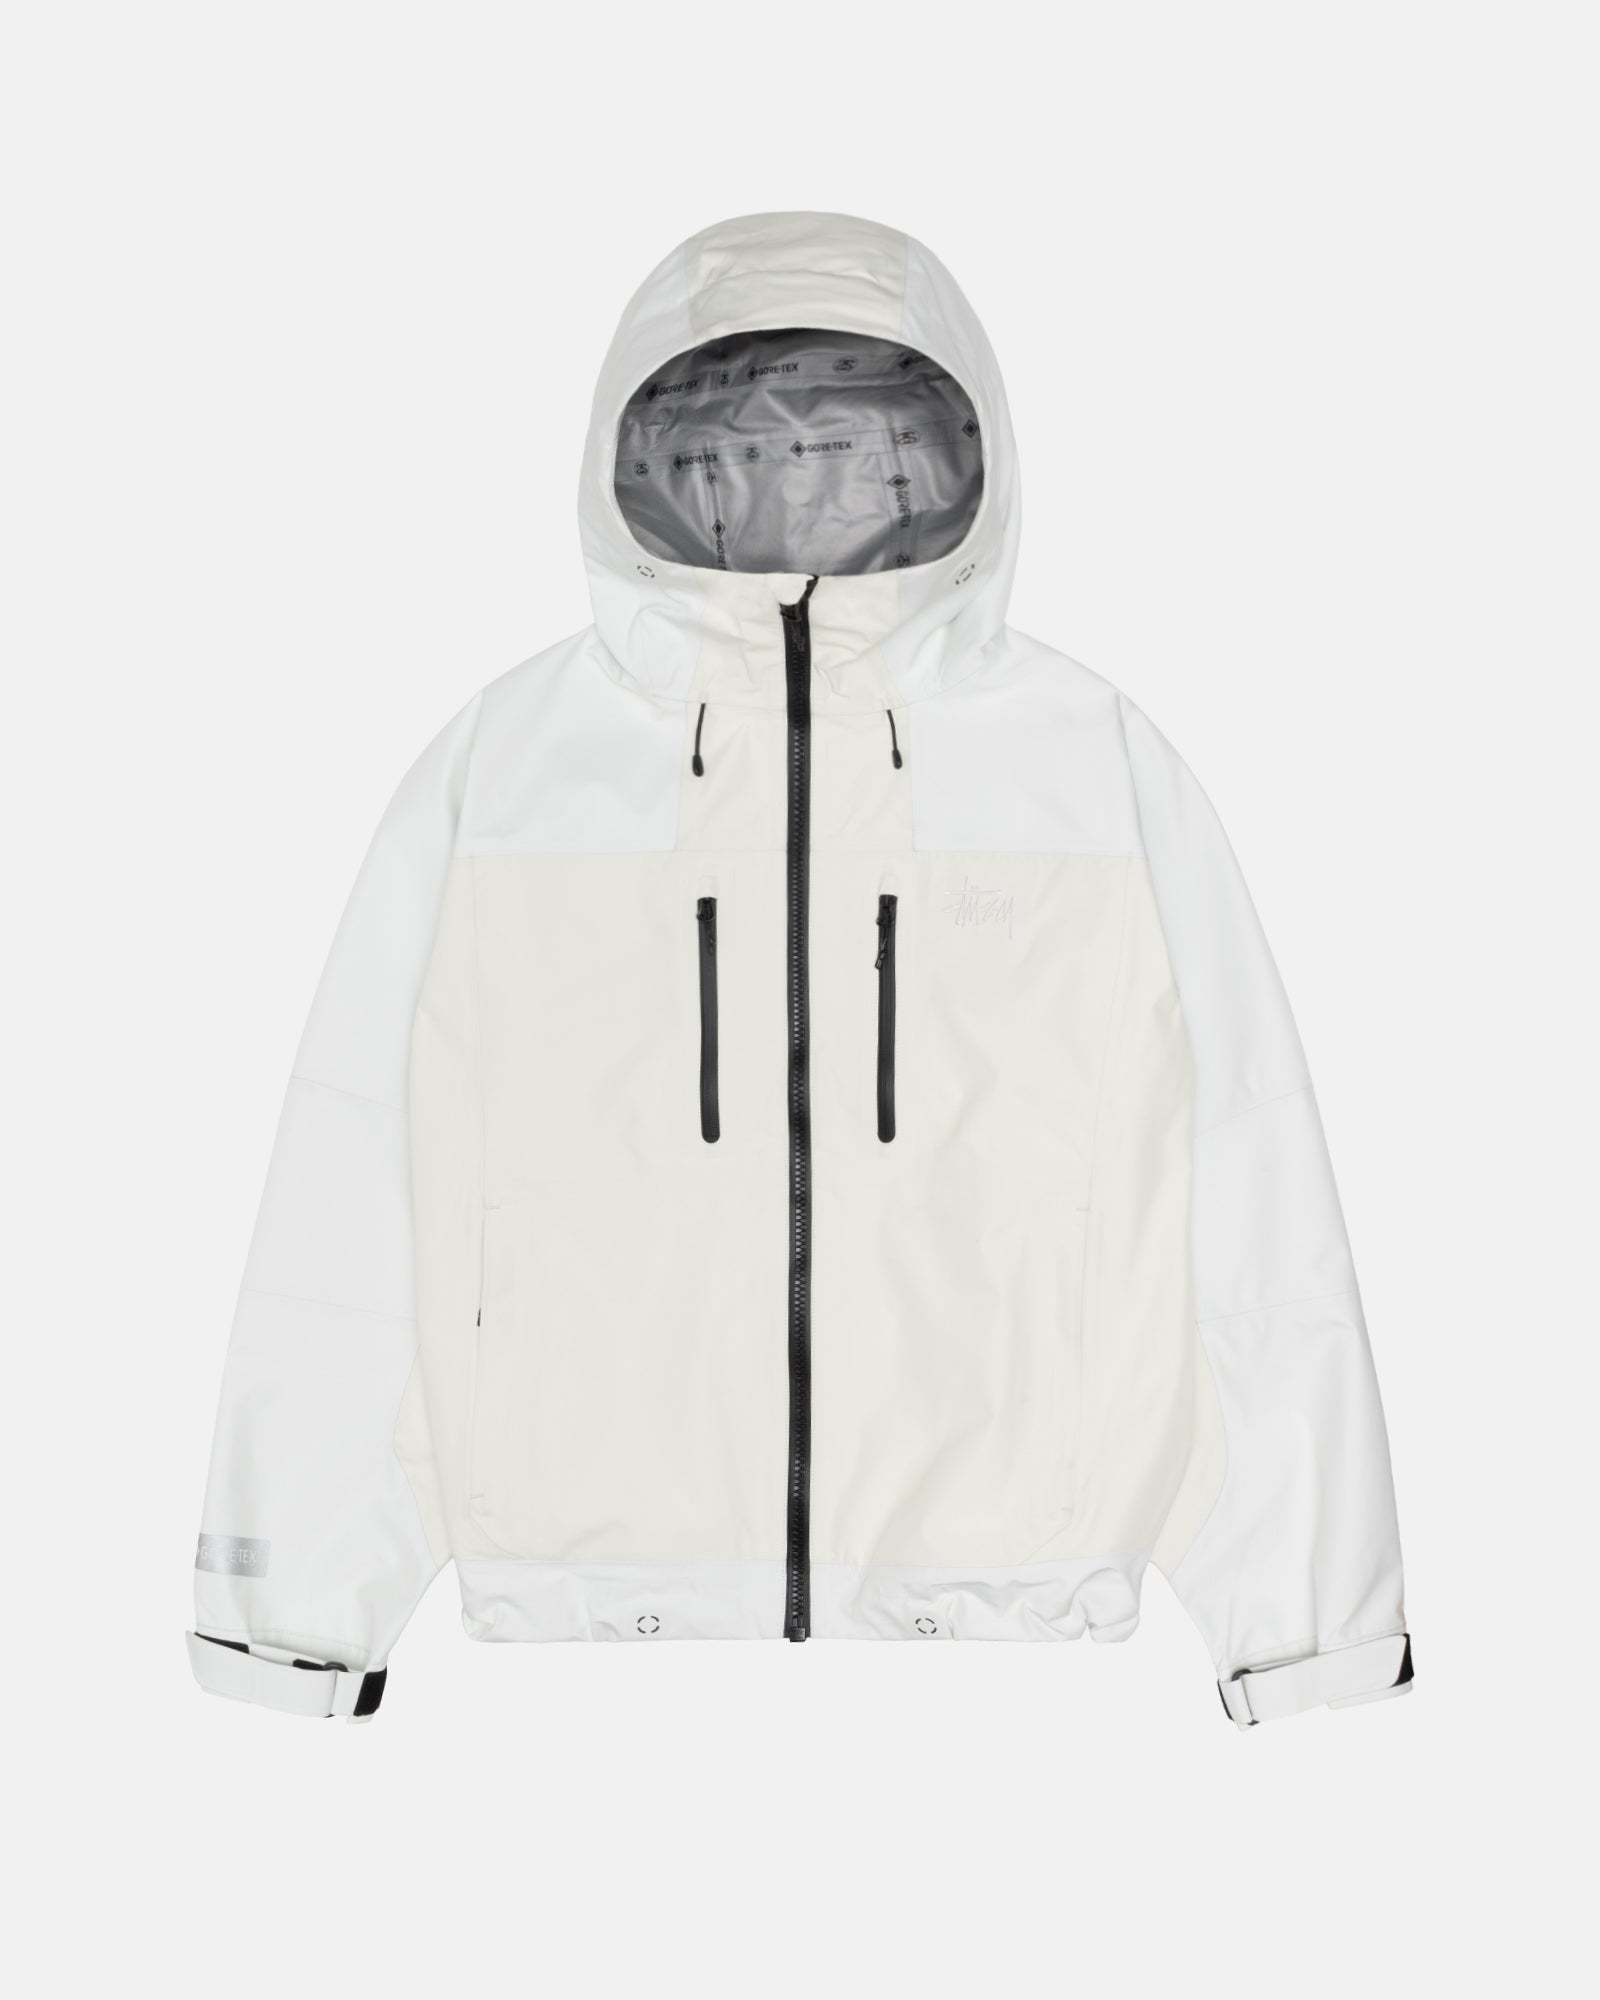 Gore-Tex Recycled Guide Shell - Unisex Jackets & Outerwear | Stüssy